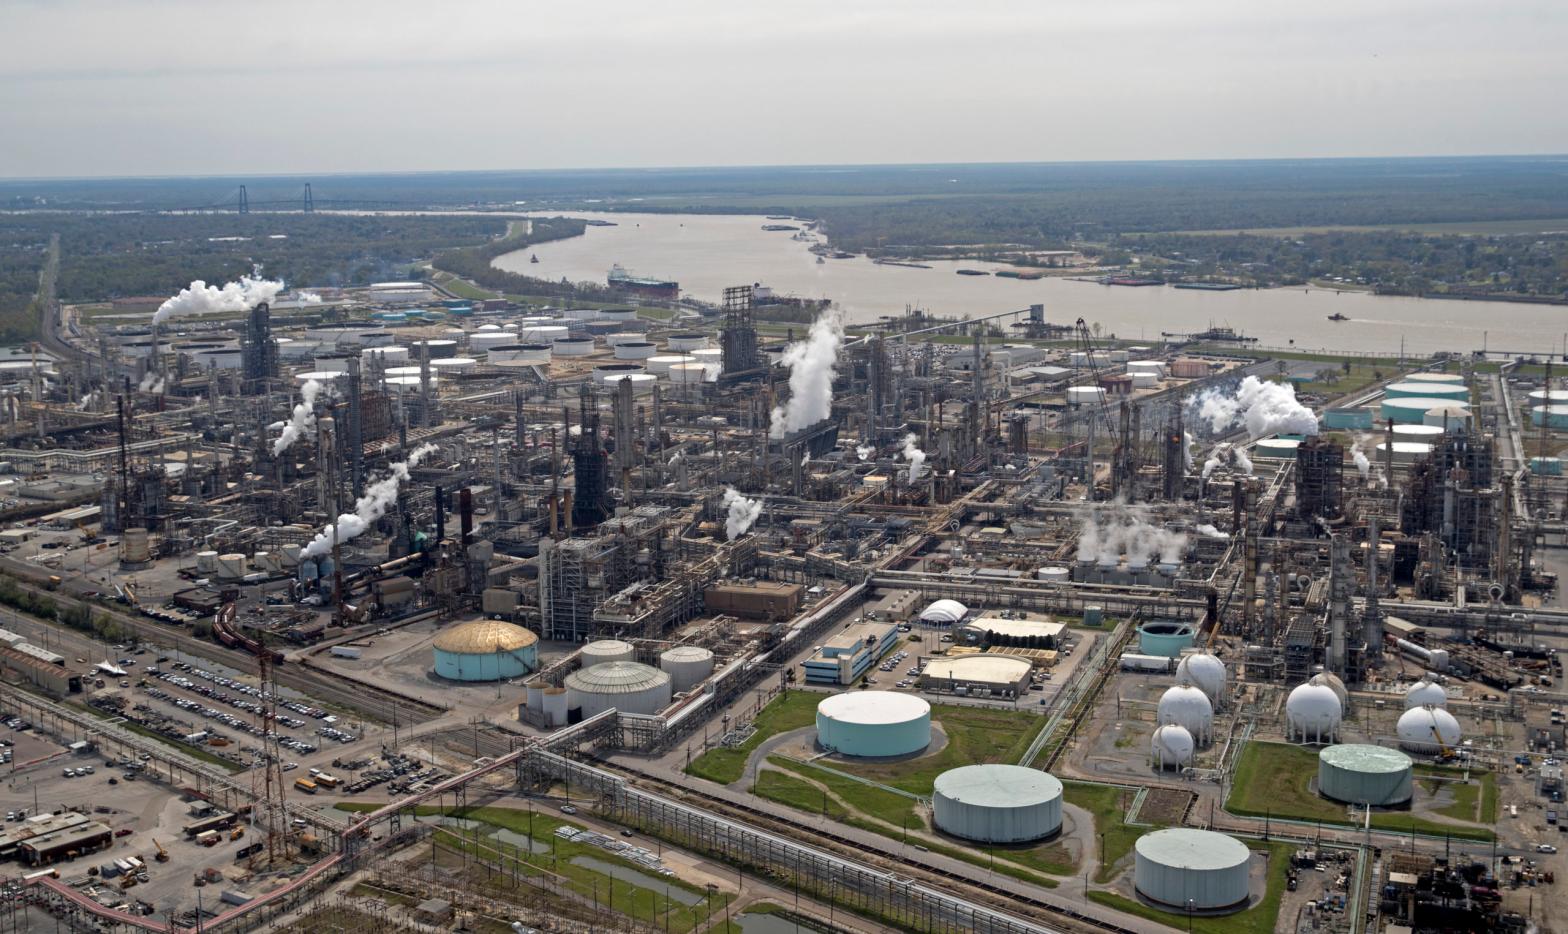 This March 8, 2018, photo shows the Shell Norco oil refinery along the Mississippi River in Norco, Louisiana (Photo: Gerald Herbert, AP)